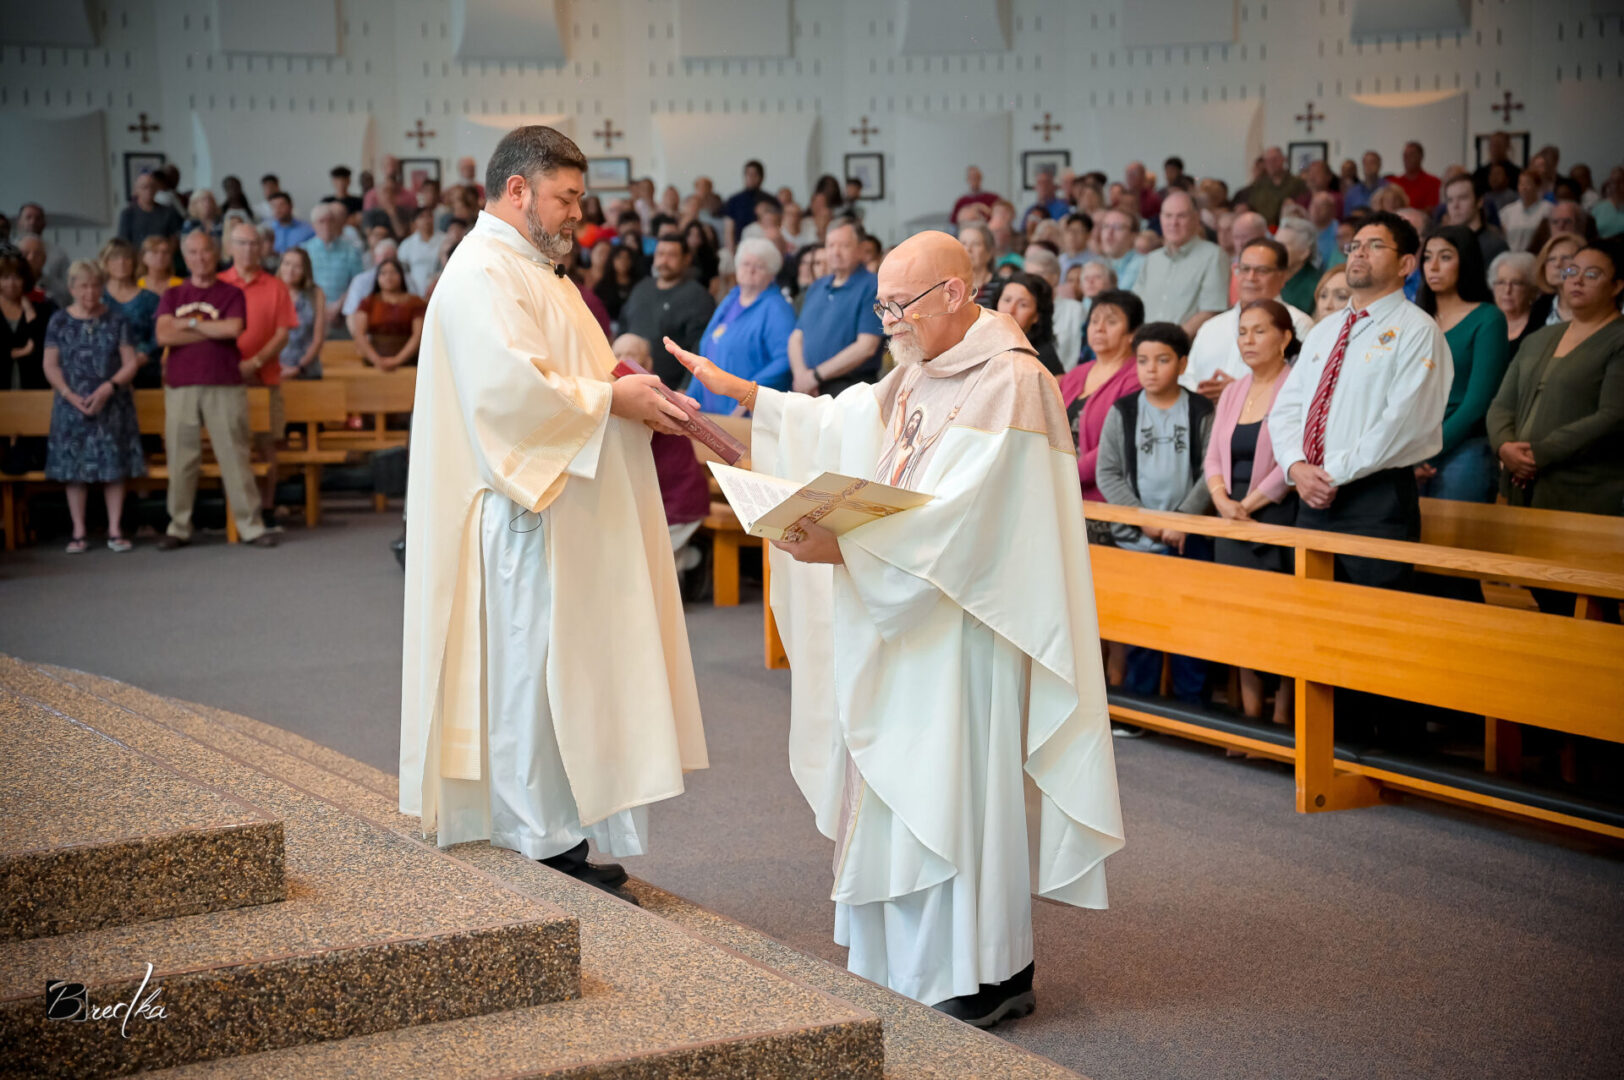 Two priests exchanging a book in church.